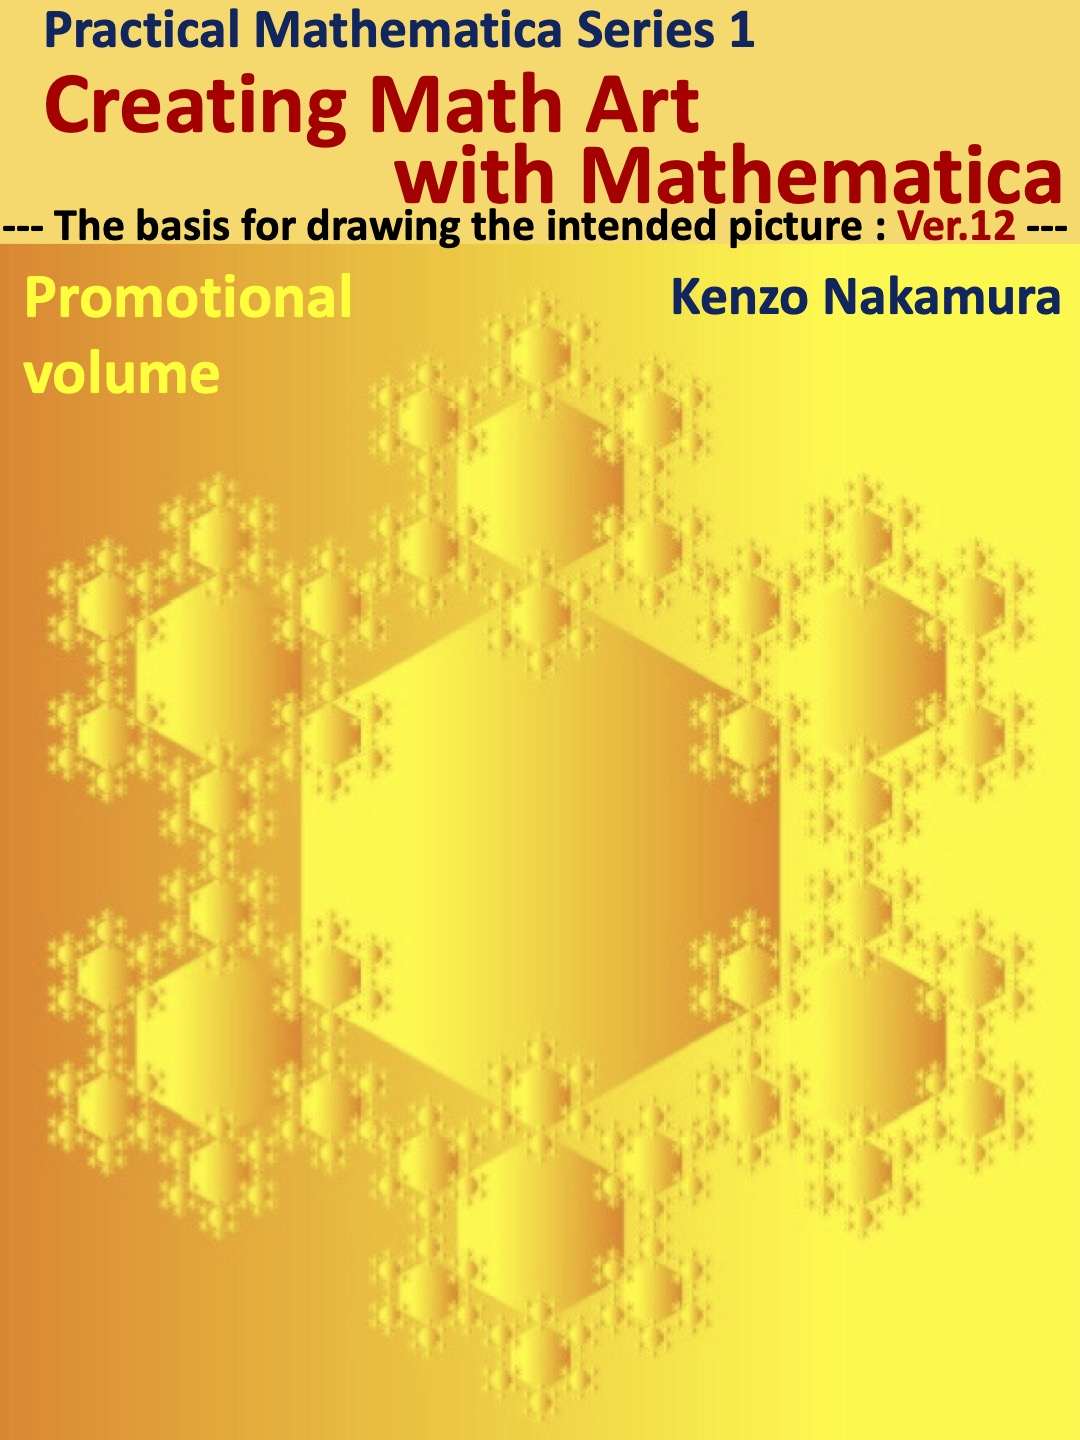 Creating Math Art with Mathematica® Promotional volume: ---The basis for drawing the intended picture--- (Practical Mathematica Series Book 1)